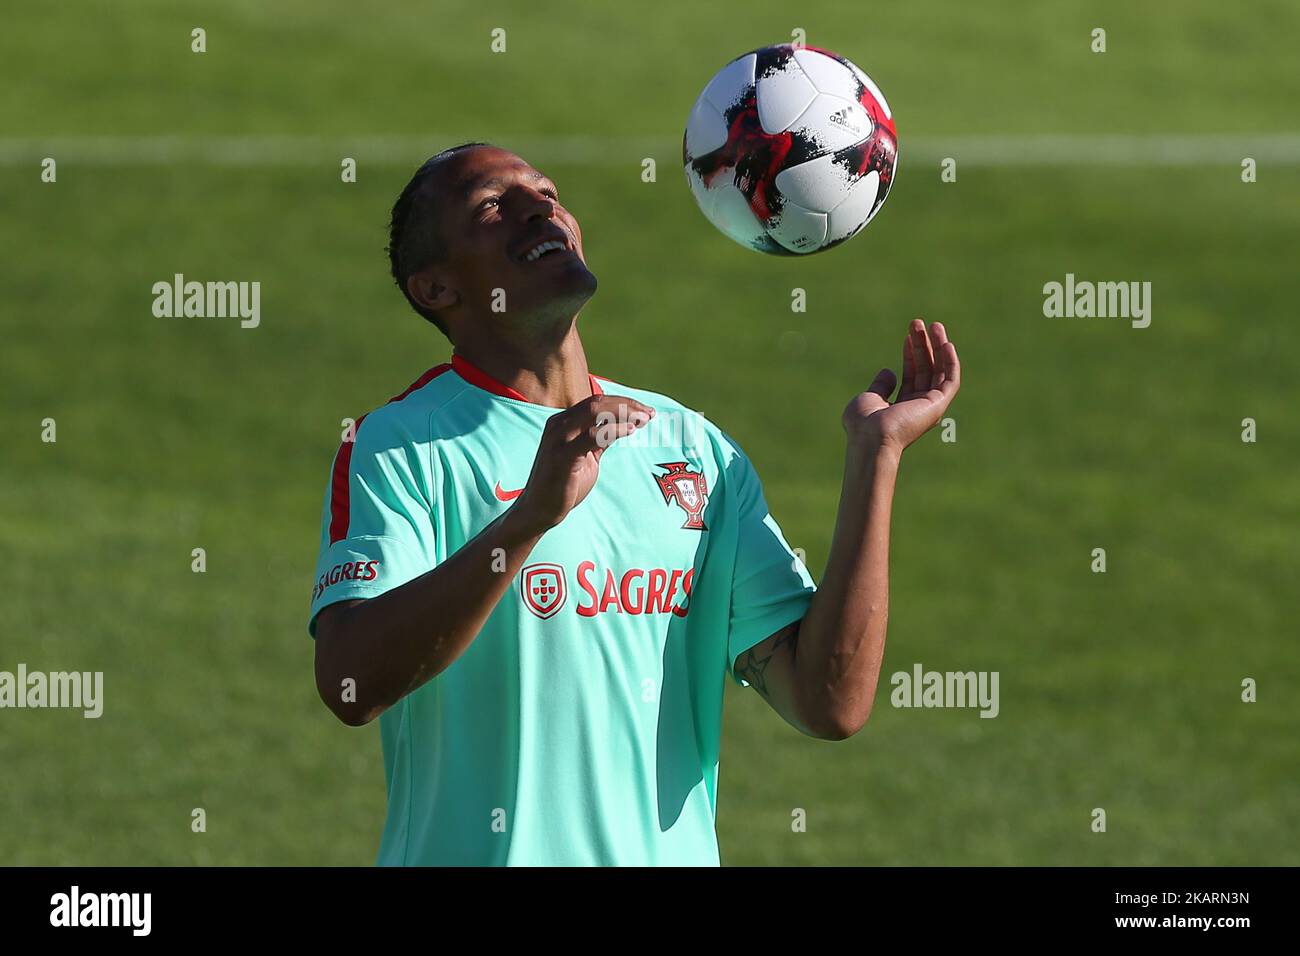 Portugal's defender Bruno Alves in action during National Team Training session before the match between Portugal and Andorra at City Football in Oeiras, Lisbon, Portugal on October 3, 2017. (Photo by Bruno Barros / DPI / NurPhoto) Stock Photo